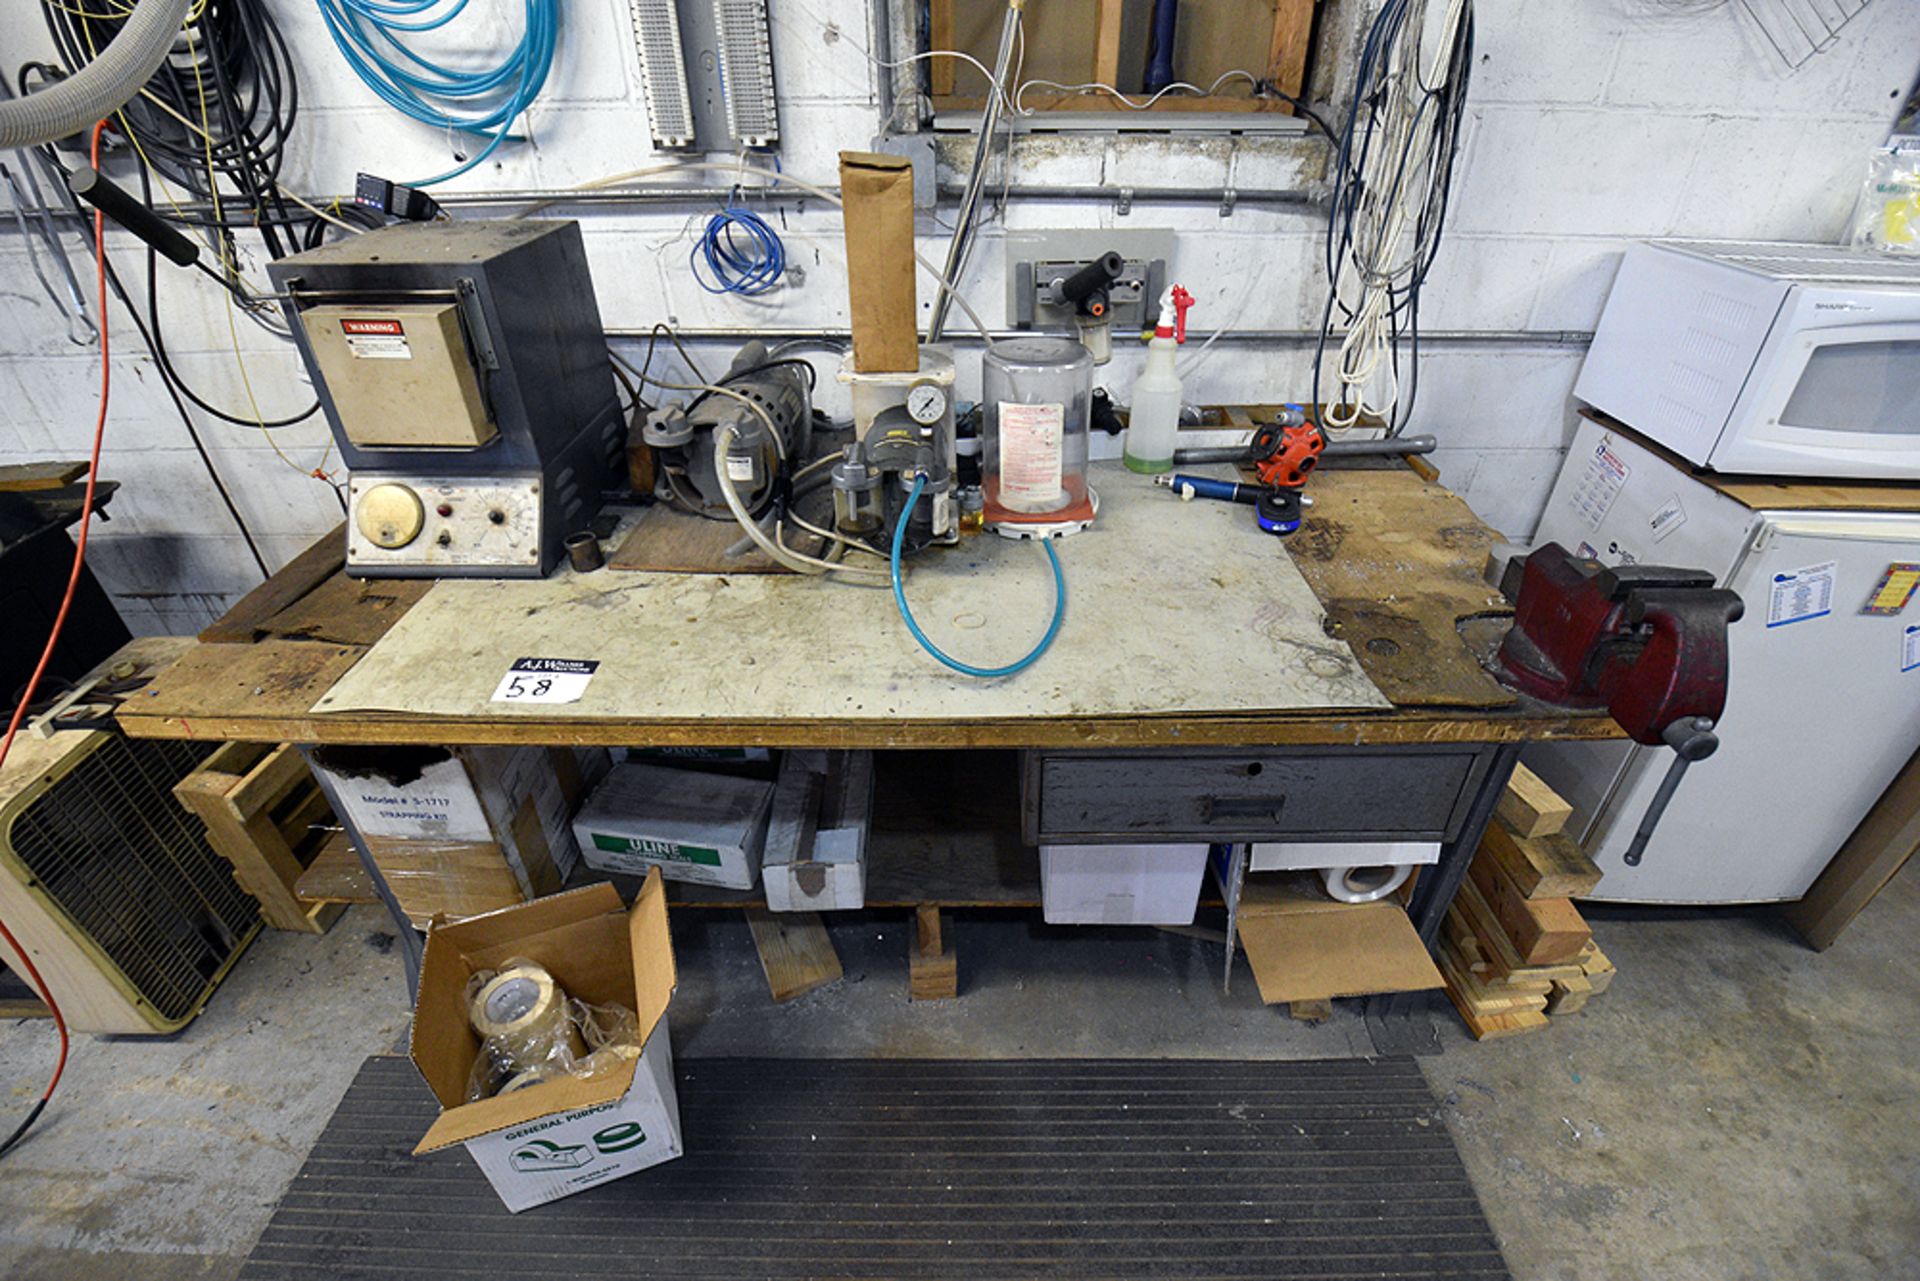 Contents of Work Area (Tools, Work Benches, Hardware, Bench Vise, Microwave, Mini Fridge, etc.) ( - Image 4 of 5